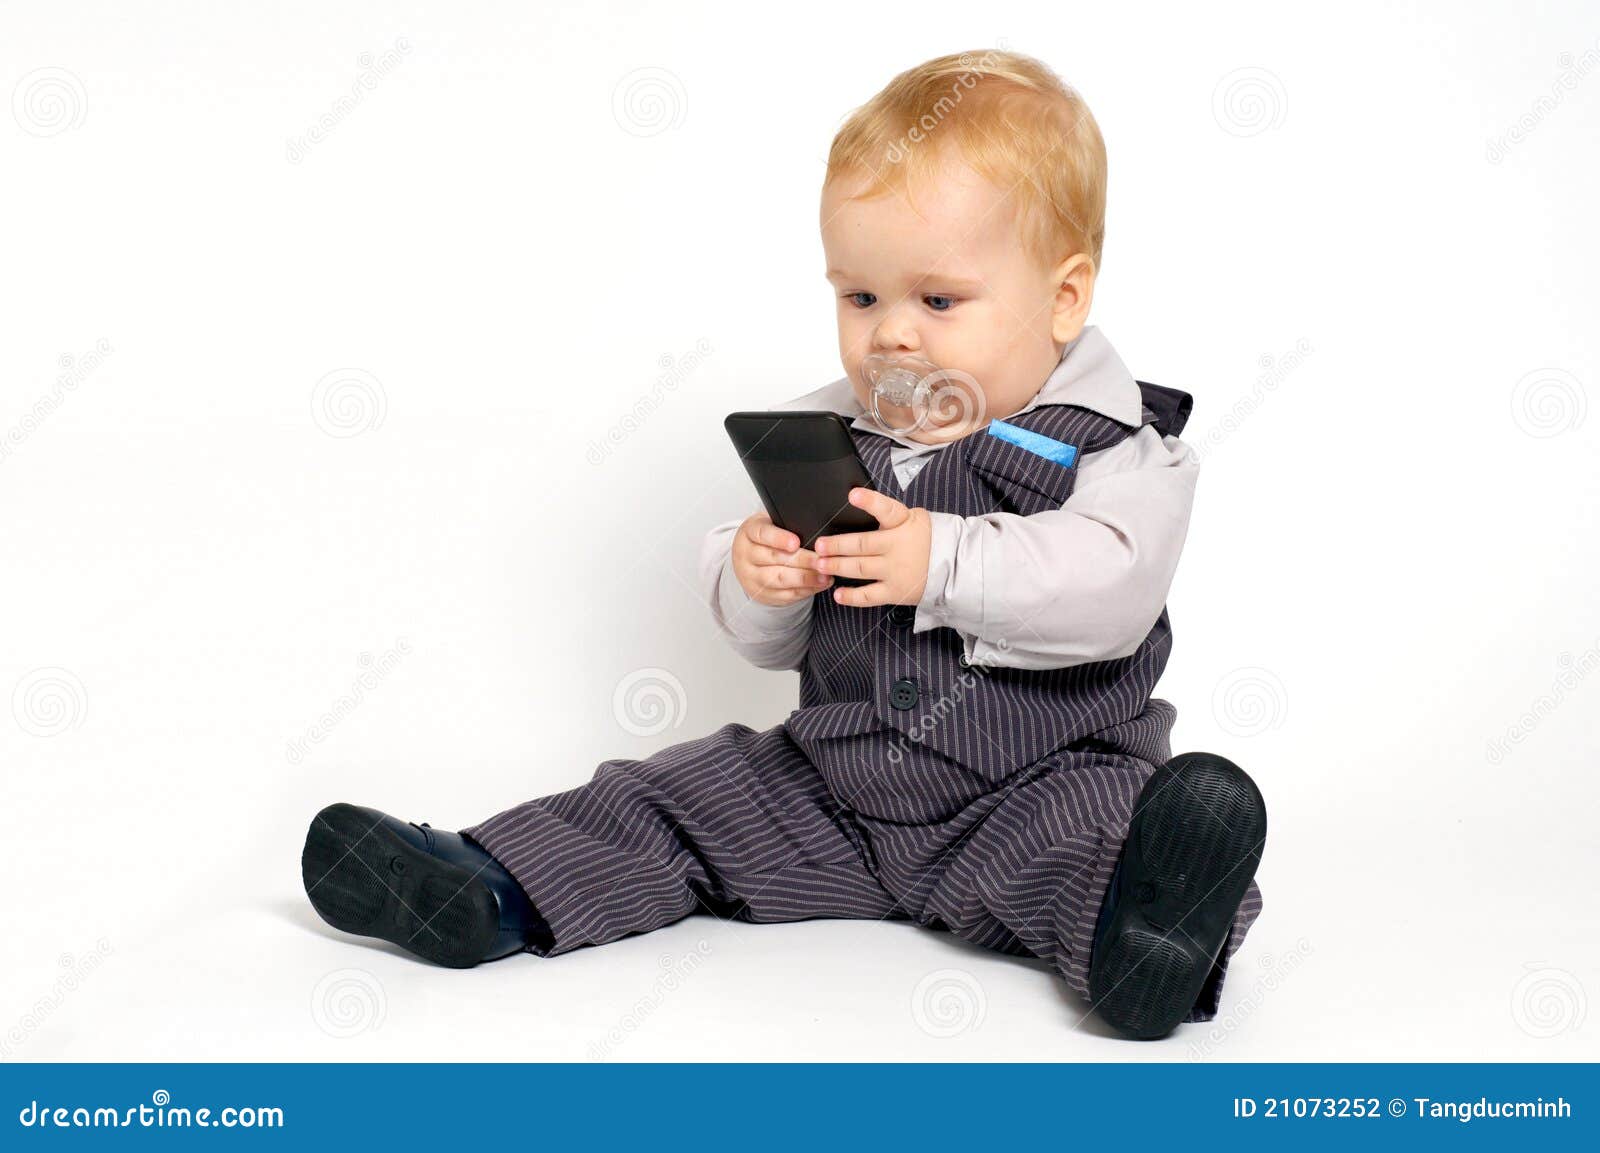 baby texting